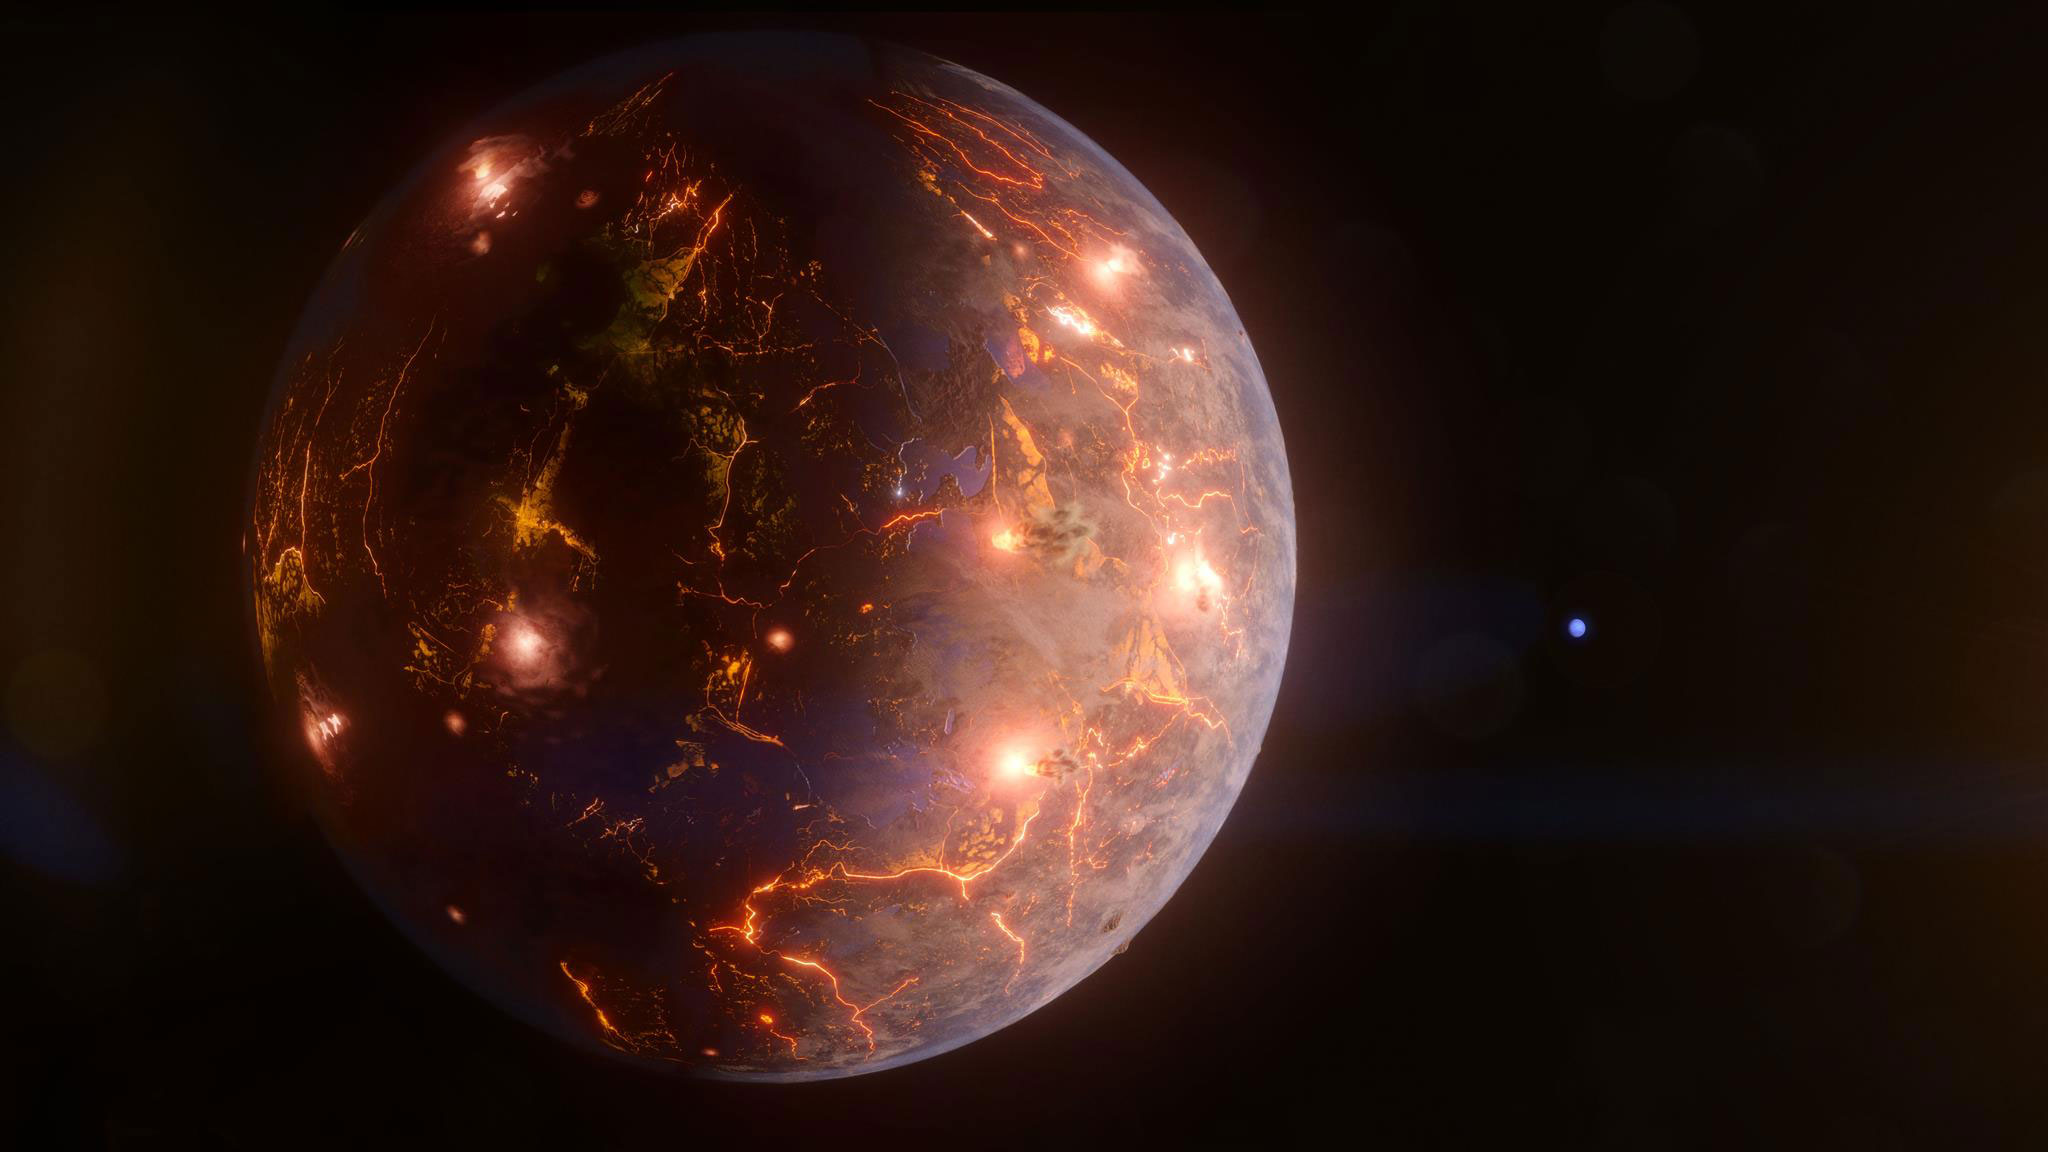 LP 791-18 d, illustrated here, is an Earth-size world about 90 light-years away. The gravitational tug from a more massive planet in the system, shown as a blue disk in the background, may result in internal heating and volcanic eruptions—as much as Jupiter’s moon Io, the most geologically active body in the solar system. Astronomers discovered and studied the planet using data from NASA’s Spitzer Space Telescope and Transiting Exoplanet Survey Satellite along with many other observatories.